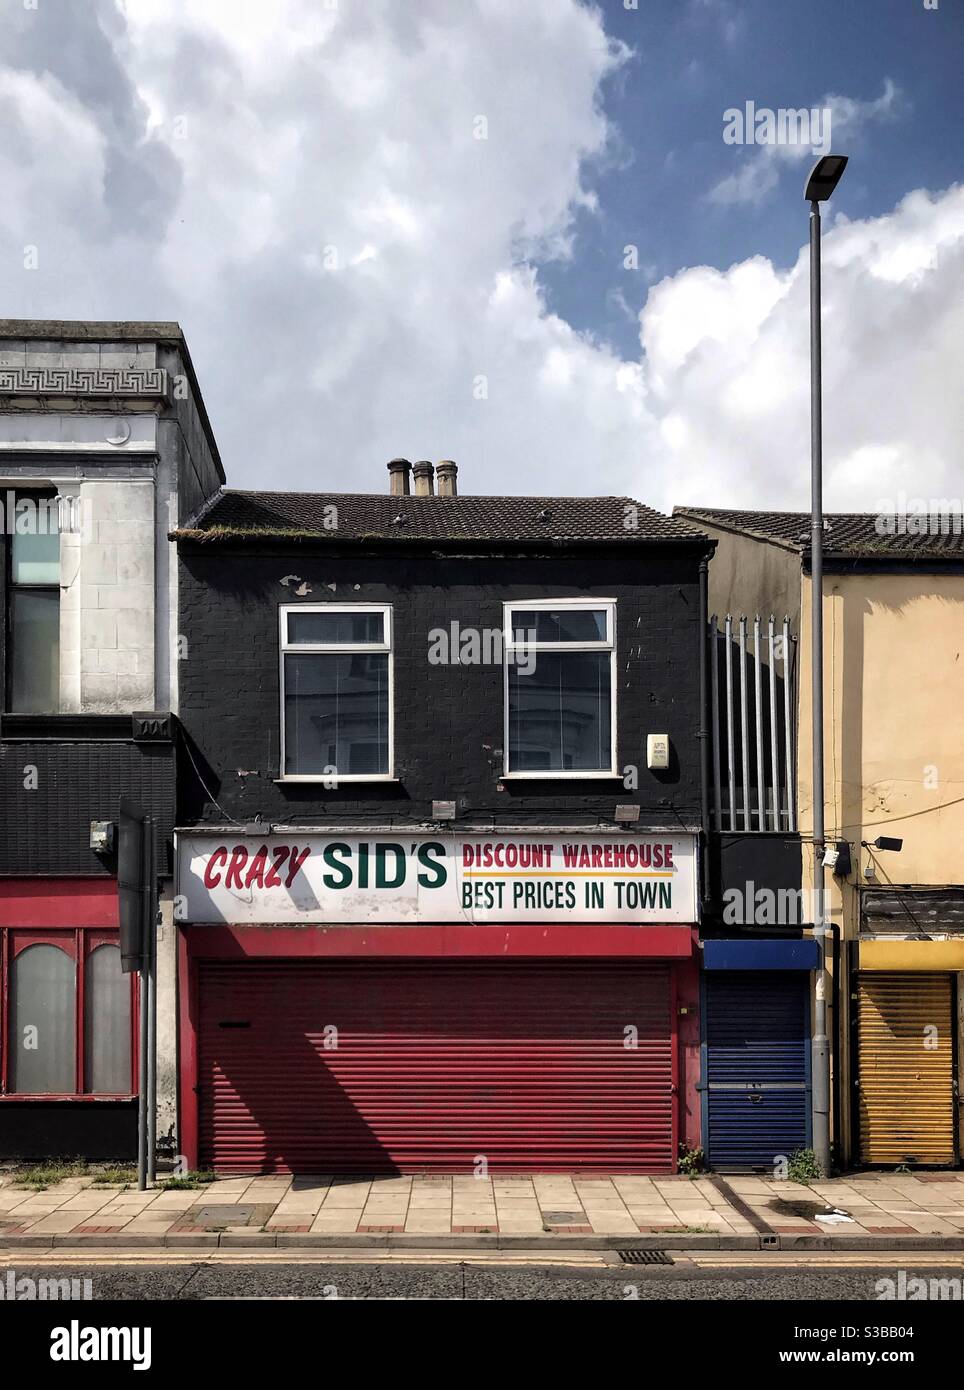 Crazy Sids discount warehouse derelict shop in Grimsby UK Stock Photo